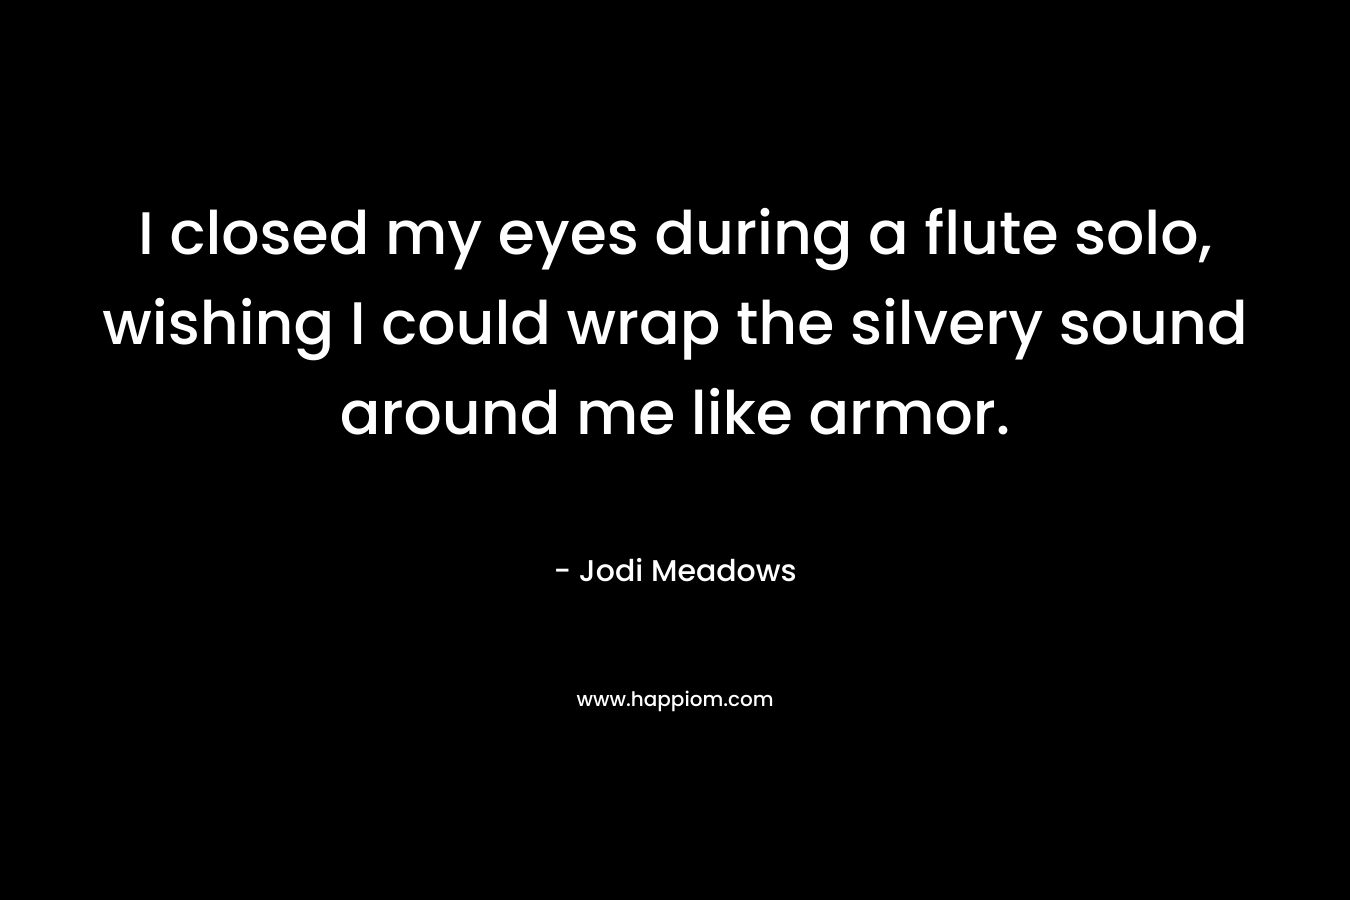 I closed my eyes during a flute solo, wishing I could wrap the silvery sound around me like armor. – Jodi Meadows